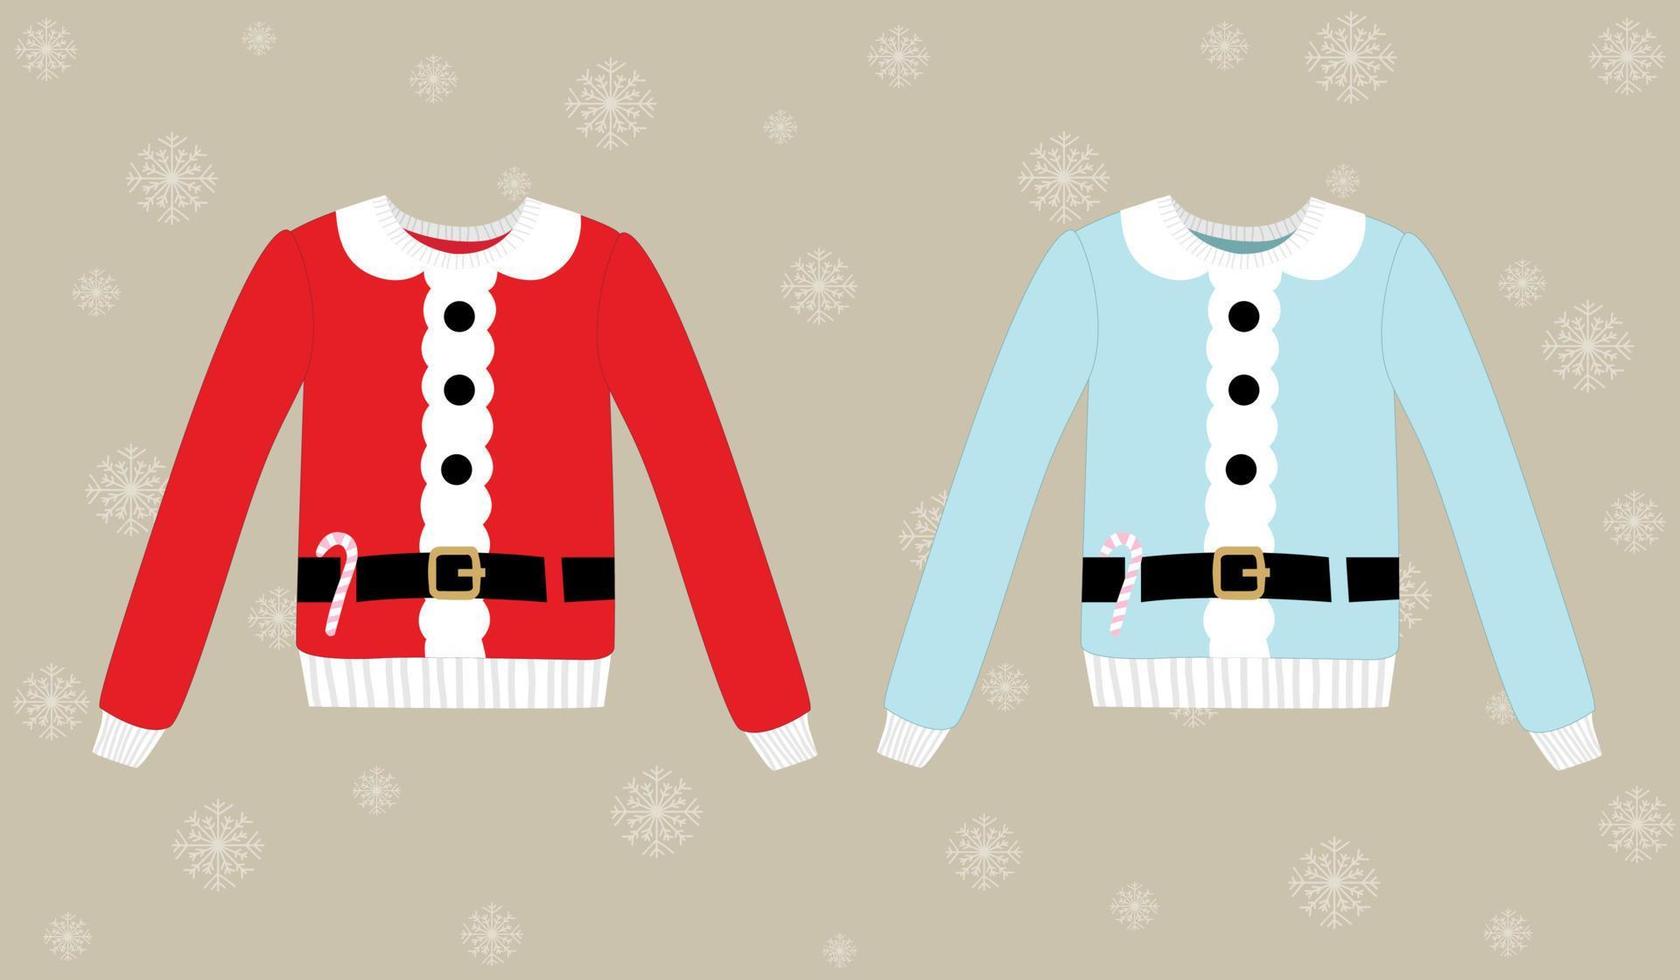 Christmas sweater on background with snowflakes vector